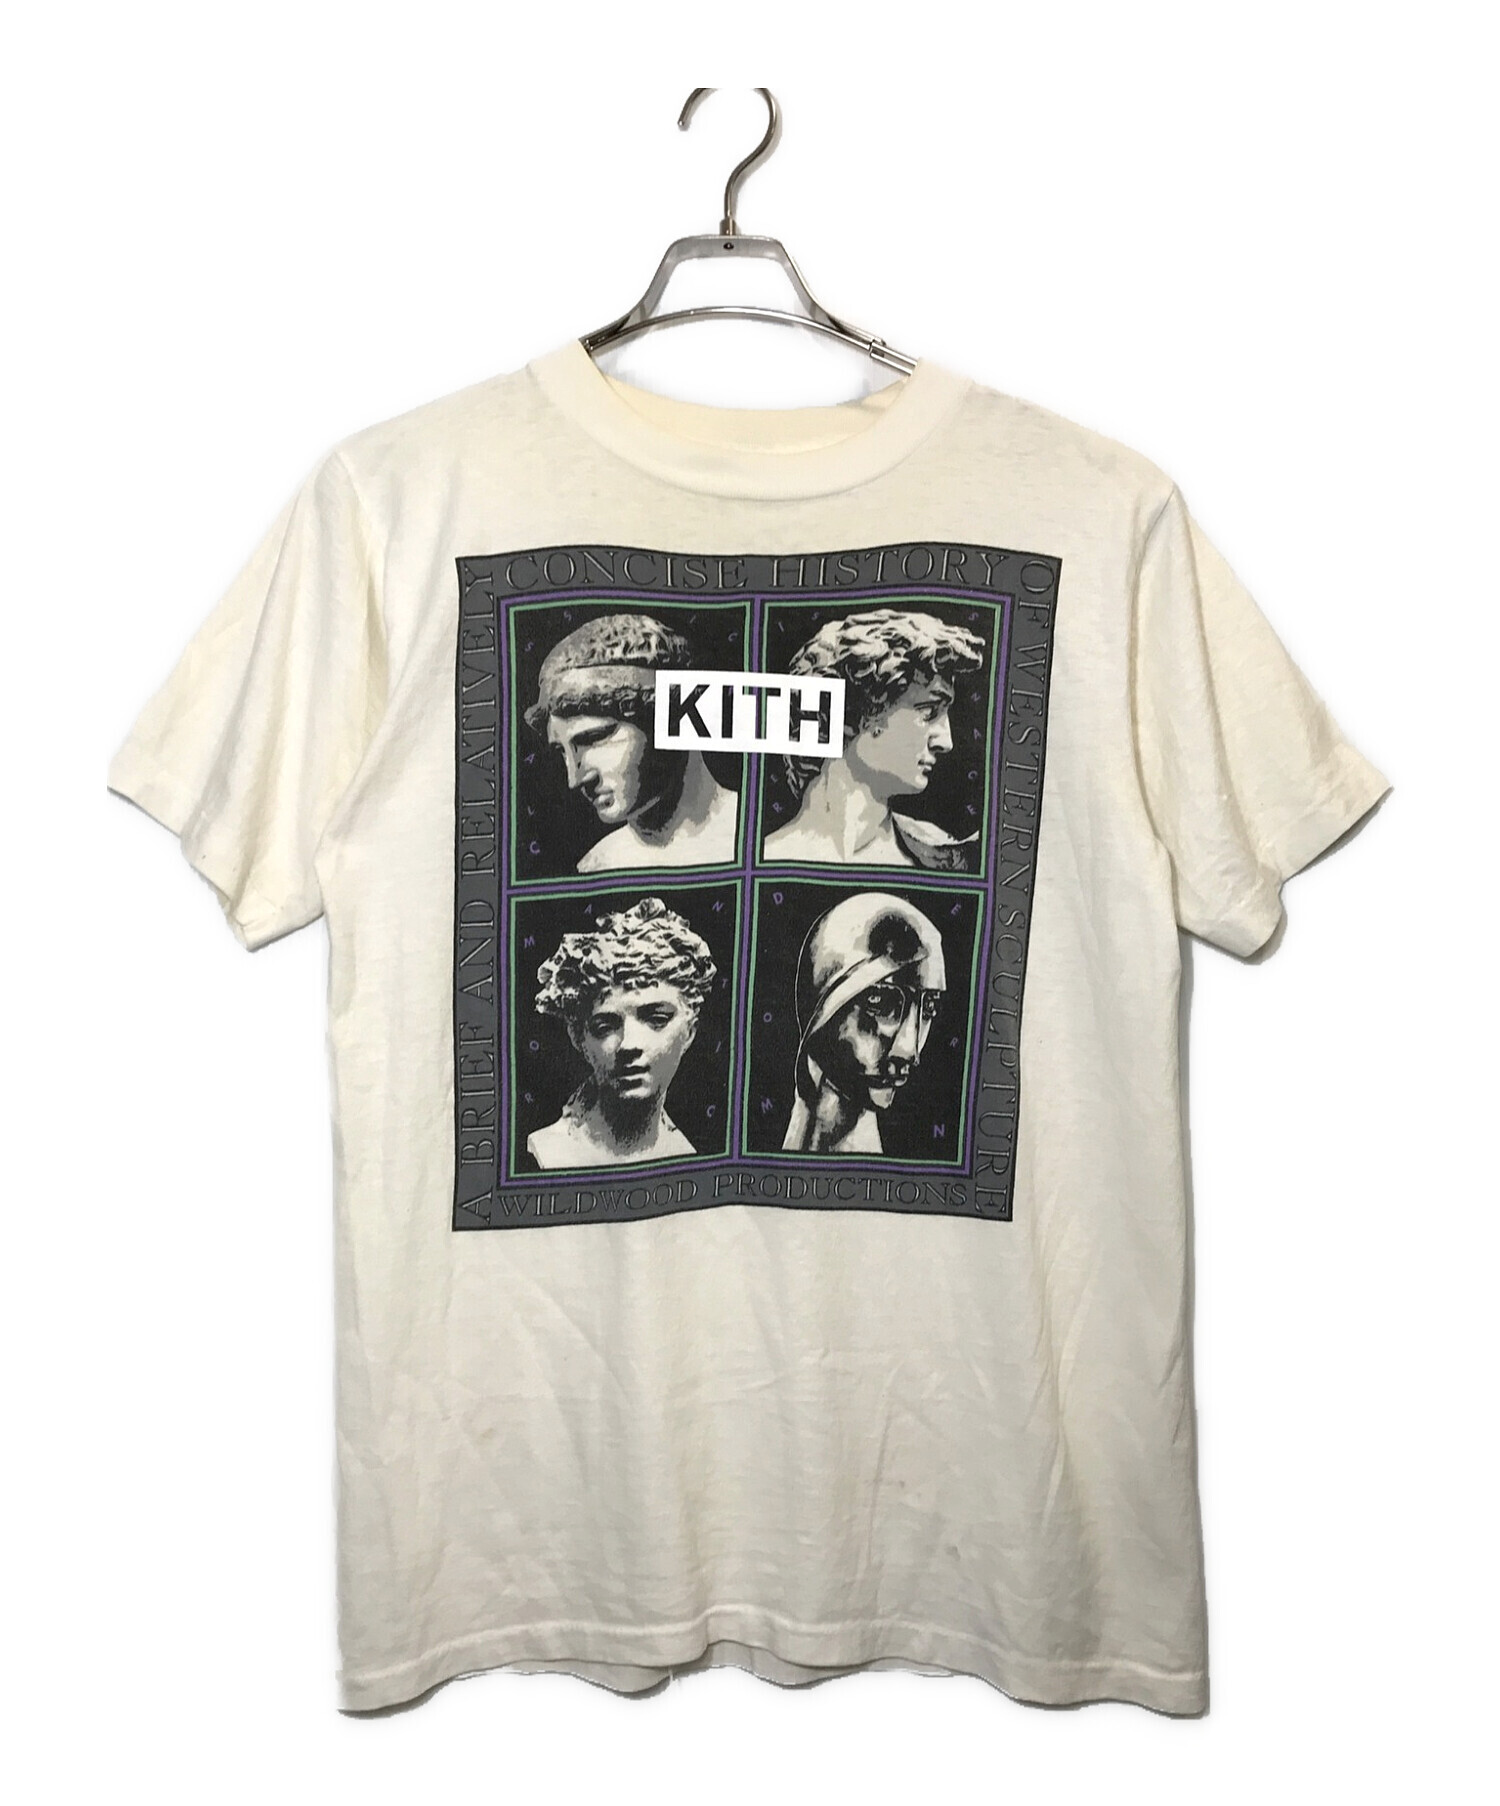 Kith For The Wire Vintage キス ヴィンテージ Tシャツホワイト